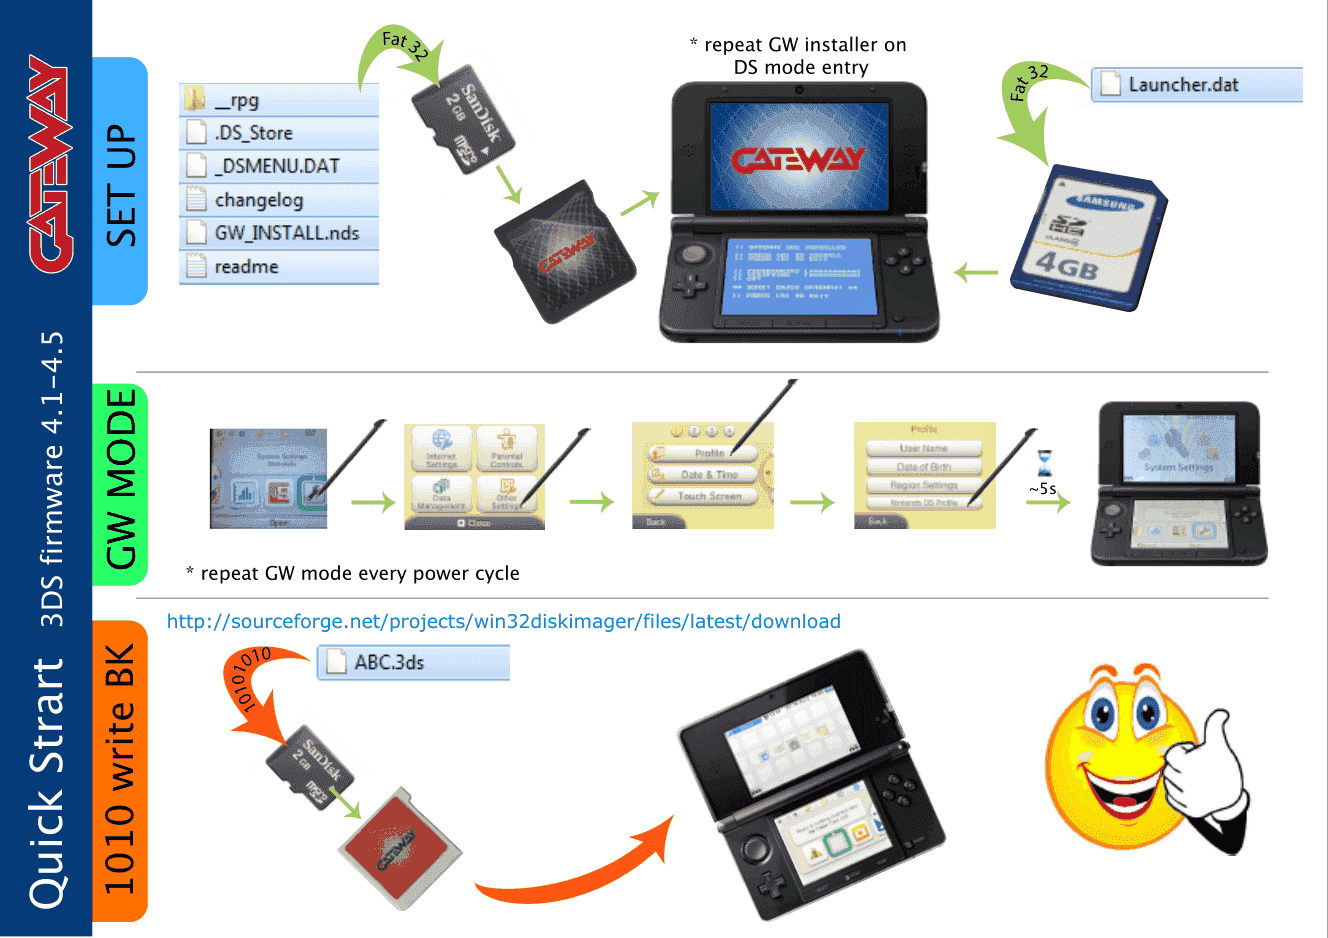 Oficial Gateway 3DS - Flashcard modo 3ds Le2tq7n-png